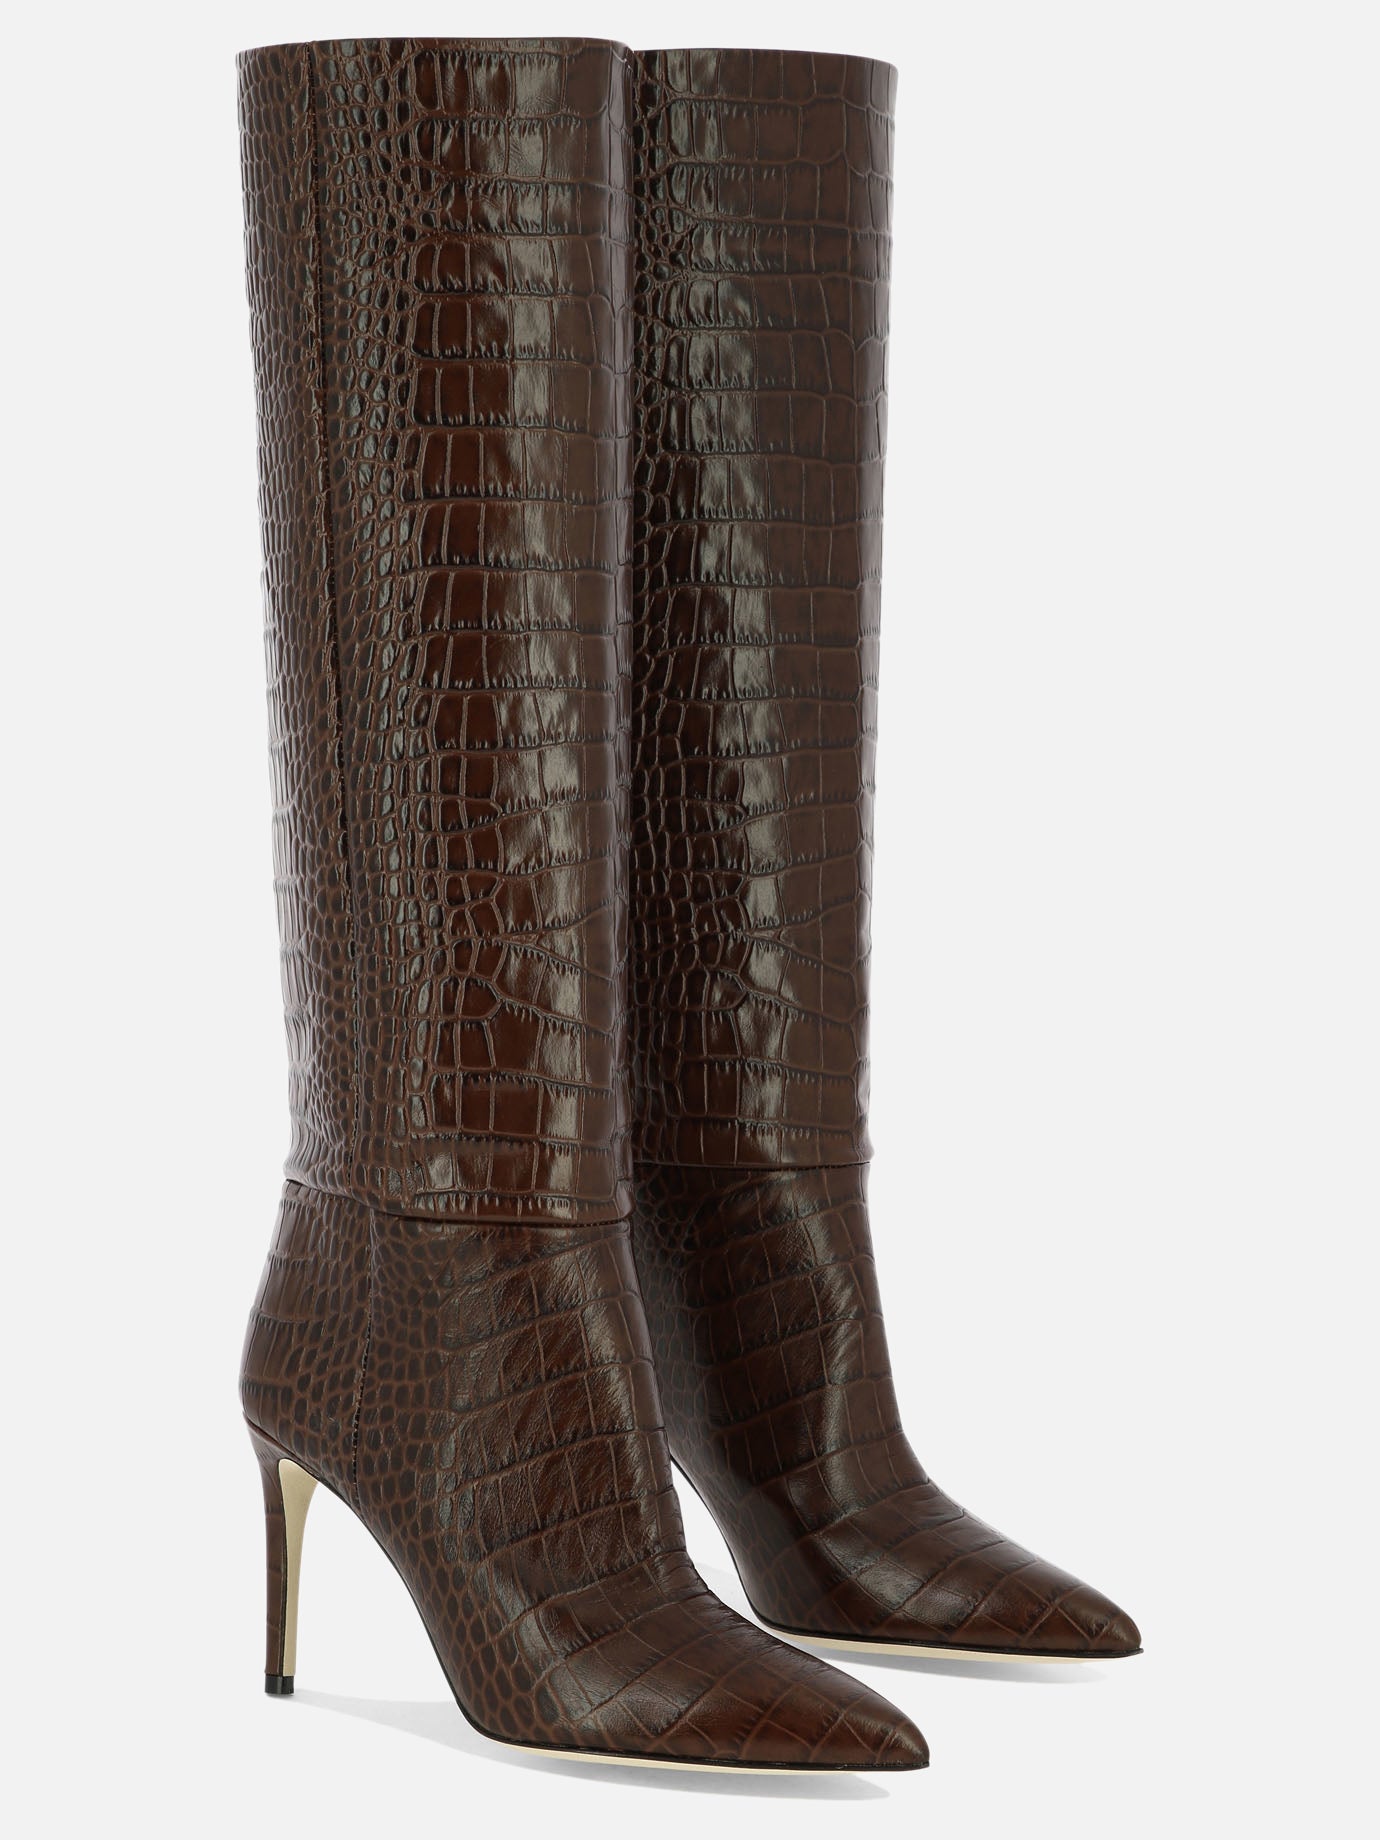 "Embossed Croco" boots